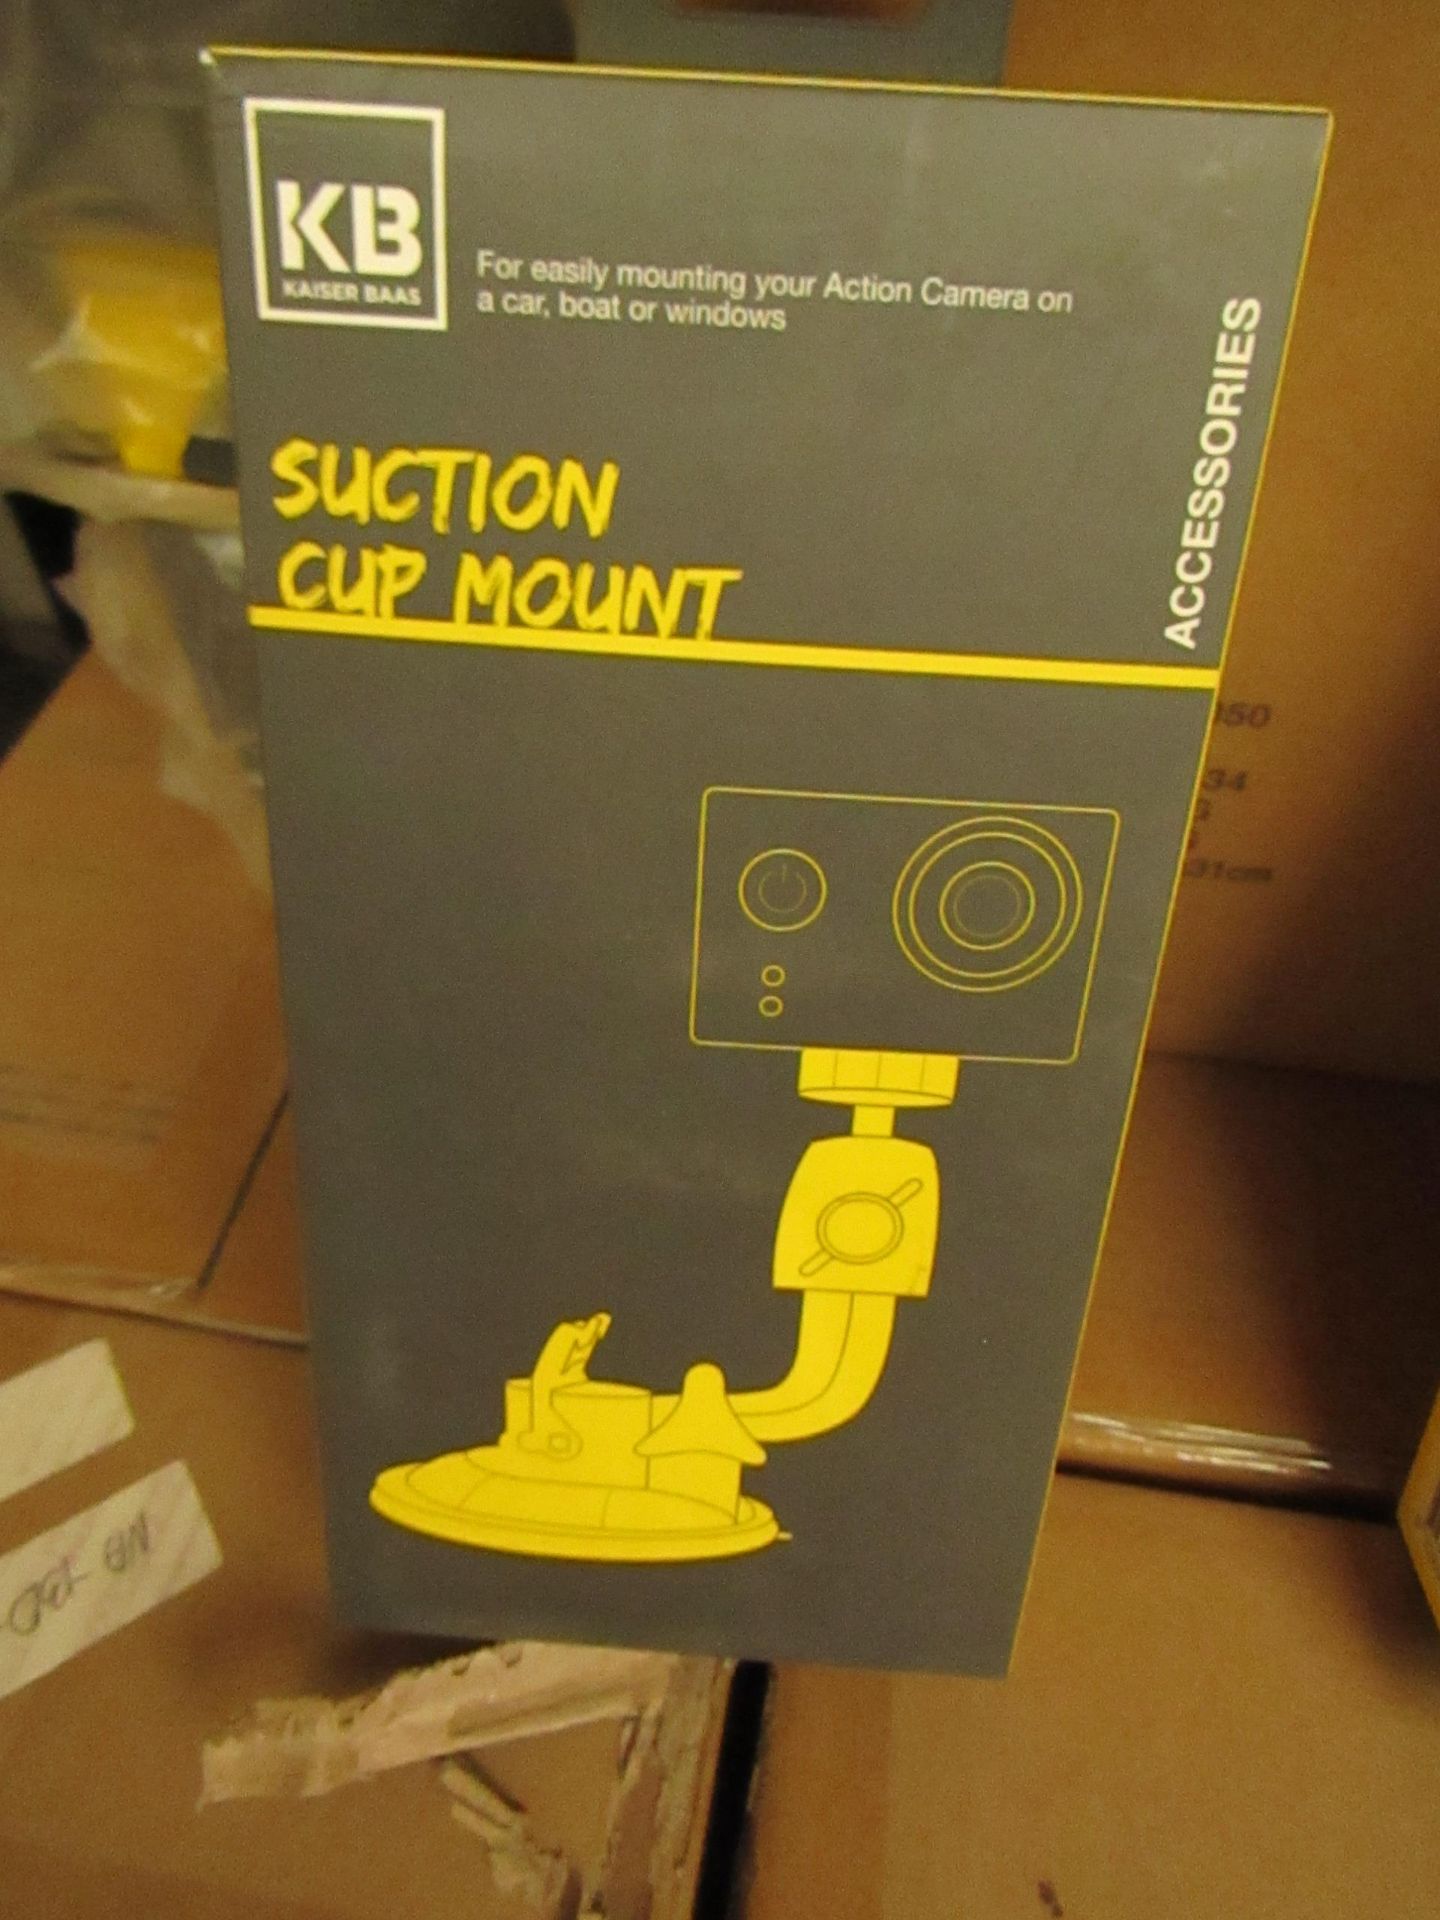 2x Kaiser Baas - Suction Cup Mount (Suitable for Mounting Action Camera) - New & Boxed.